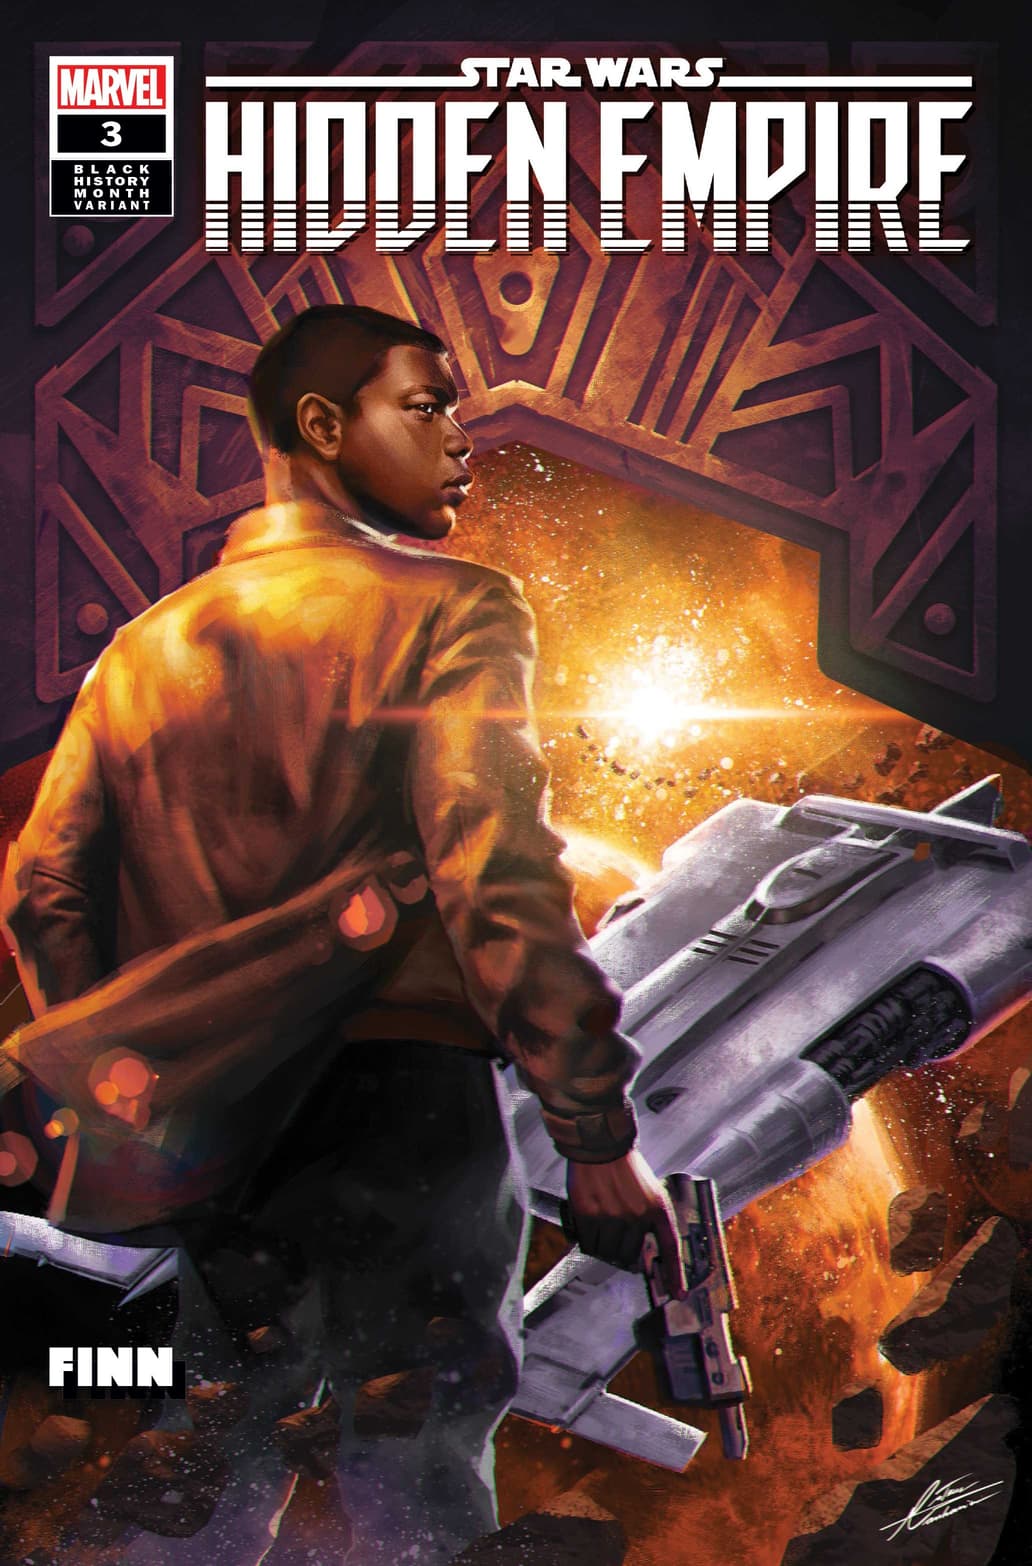 STAR WARS: HIDDEN EMPIRE #3 (OF 5) Black History Month Variant Cover by Mateus Manhanini